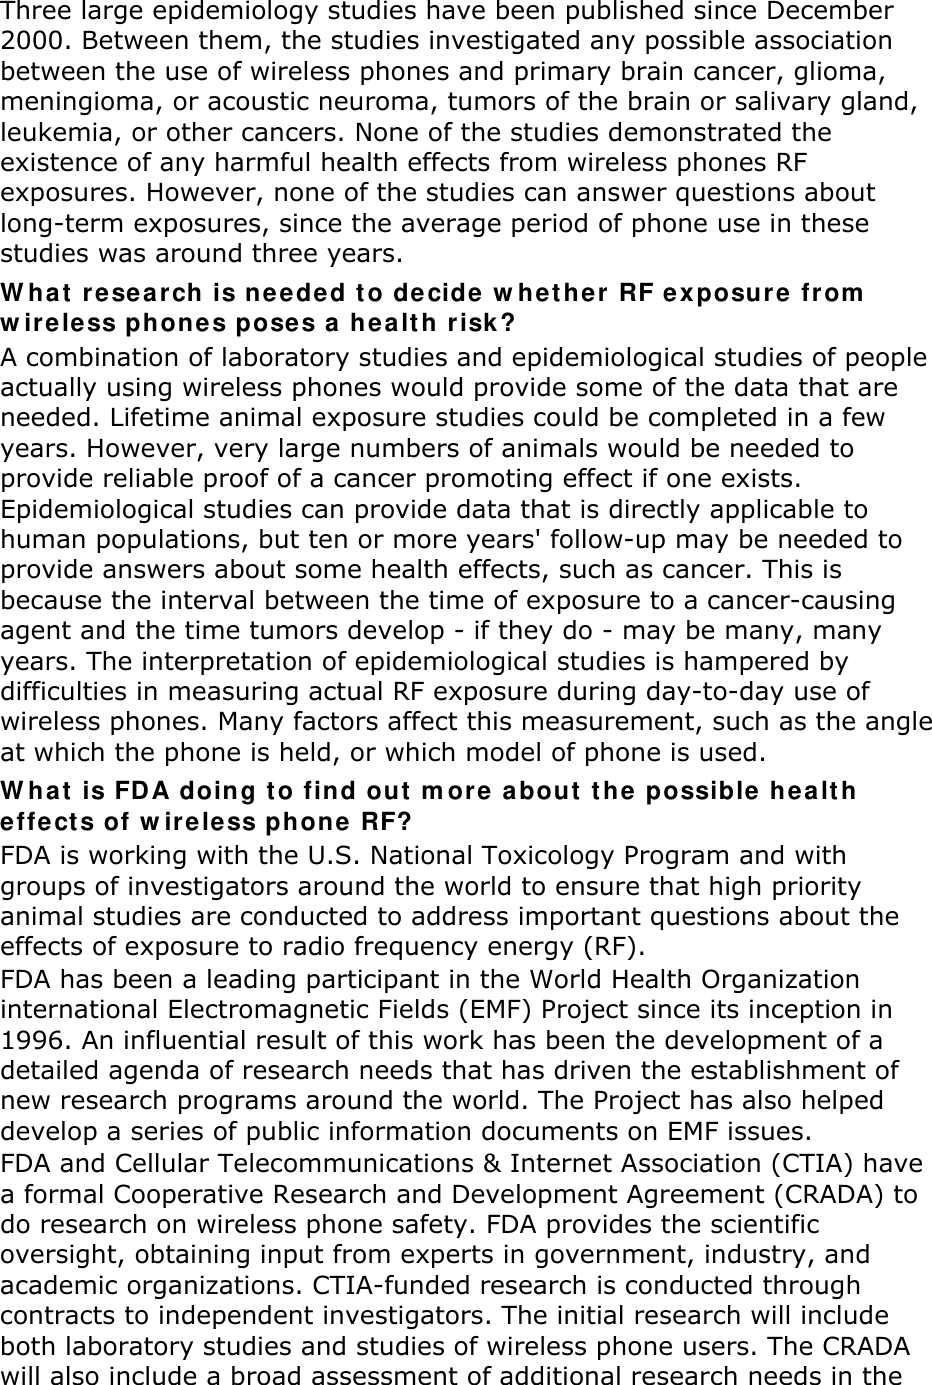 Three large epidemiology studies have been published since December 2000. Between them, the studies investigated any possible association between the use of wireless phones and primary brain cancer, glioma, meningioma, or acoustic neuroma, tumors of the brain or salivary gland, leukemia, or other cancers. None of the studies demonstrated the existence of any harmful health effects from wireless phones RF exposures. However, none of the studies can answer questions about long-term exposures, since the average period of phone use in these studies was around three years. What research is needed to decide whether RF exposure from wireless phones poses a health risk? A combination of laboratory studies and epidemiological studies of people actually using wireless phones would provide some of the data that are needed. Lifetime animal exposure studies could be completed in a few years. However, very large numbers of animals would be needed to provide reliable proof of a cancer promoting effect if one exists. Epidemiological studies can provide data that is directly applicable to human populations, but ten or more years&apos; follow-up may be needed to provide answers about some health effects, such as cancer. This is because the interval between the time of exposure to a cancer-causing agent and the time tumors develop - if they do - may be many, many years. The interpretation of epidemiological studies is hampered by difficulties in measuring actual RF exposure during day-to-day use of wireless phones. Many factors affect this measurement, such as the angle at which the phone is held, or which model of phone is used. What is FDA doing to find out more about the possible health effects of wireless phone RF? FDA is working with the U.S. National Toxicology Program and with groups of investigators around the world to ensure that high priority animal studies are conducted to address important questions about the effects of exposure to radio frequency energy (RF). FDA has been a leading participant in the World Health Organization international Electromagnetic Fields (EMF) Project since its inception in 1996. An influential result of this work has been the development of a detailed agenda of research needs that has driven the establishment of new research programs around the world. The Project has also helped develop a series of public information documents on EMF issues. FDA and Cellular Telecommunications &amp; Internet Association (CTIA) have a formal Cooperative Research and Development Agreement (CRADA) to do research on wireless phone safety. FDA provides the scientific oversight, obtaining input from experts in government, industry, and academic organizations. CTIA-funded research is conducted through contracts to independent investigators. The initial research will include both laboratory studies and studies of wireless phone users. The CRADA will also include a broad assessment of additional research needs in the 